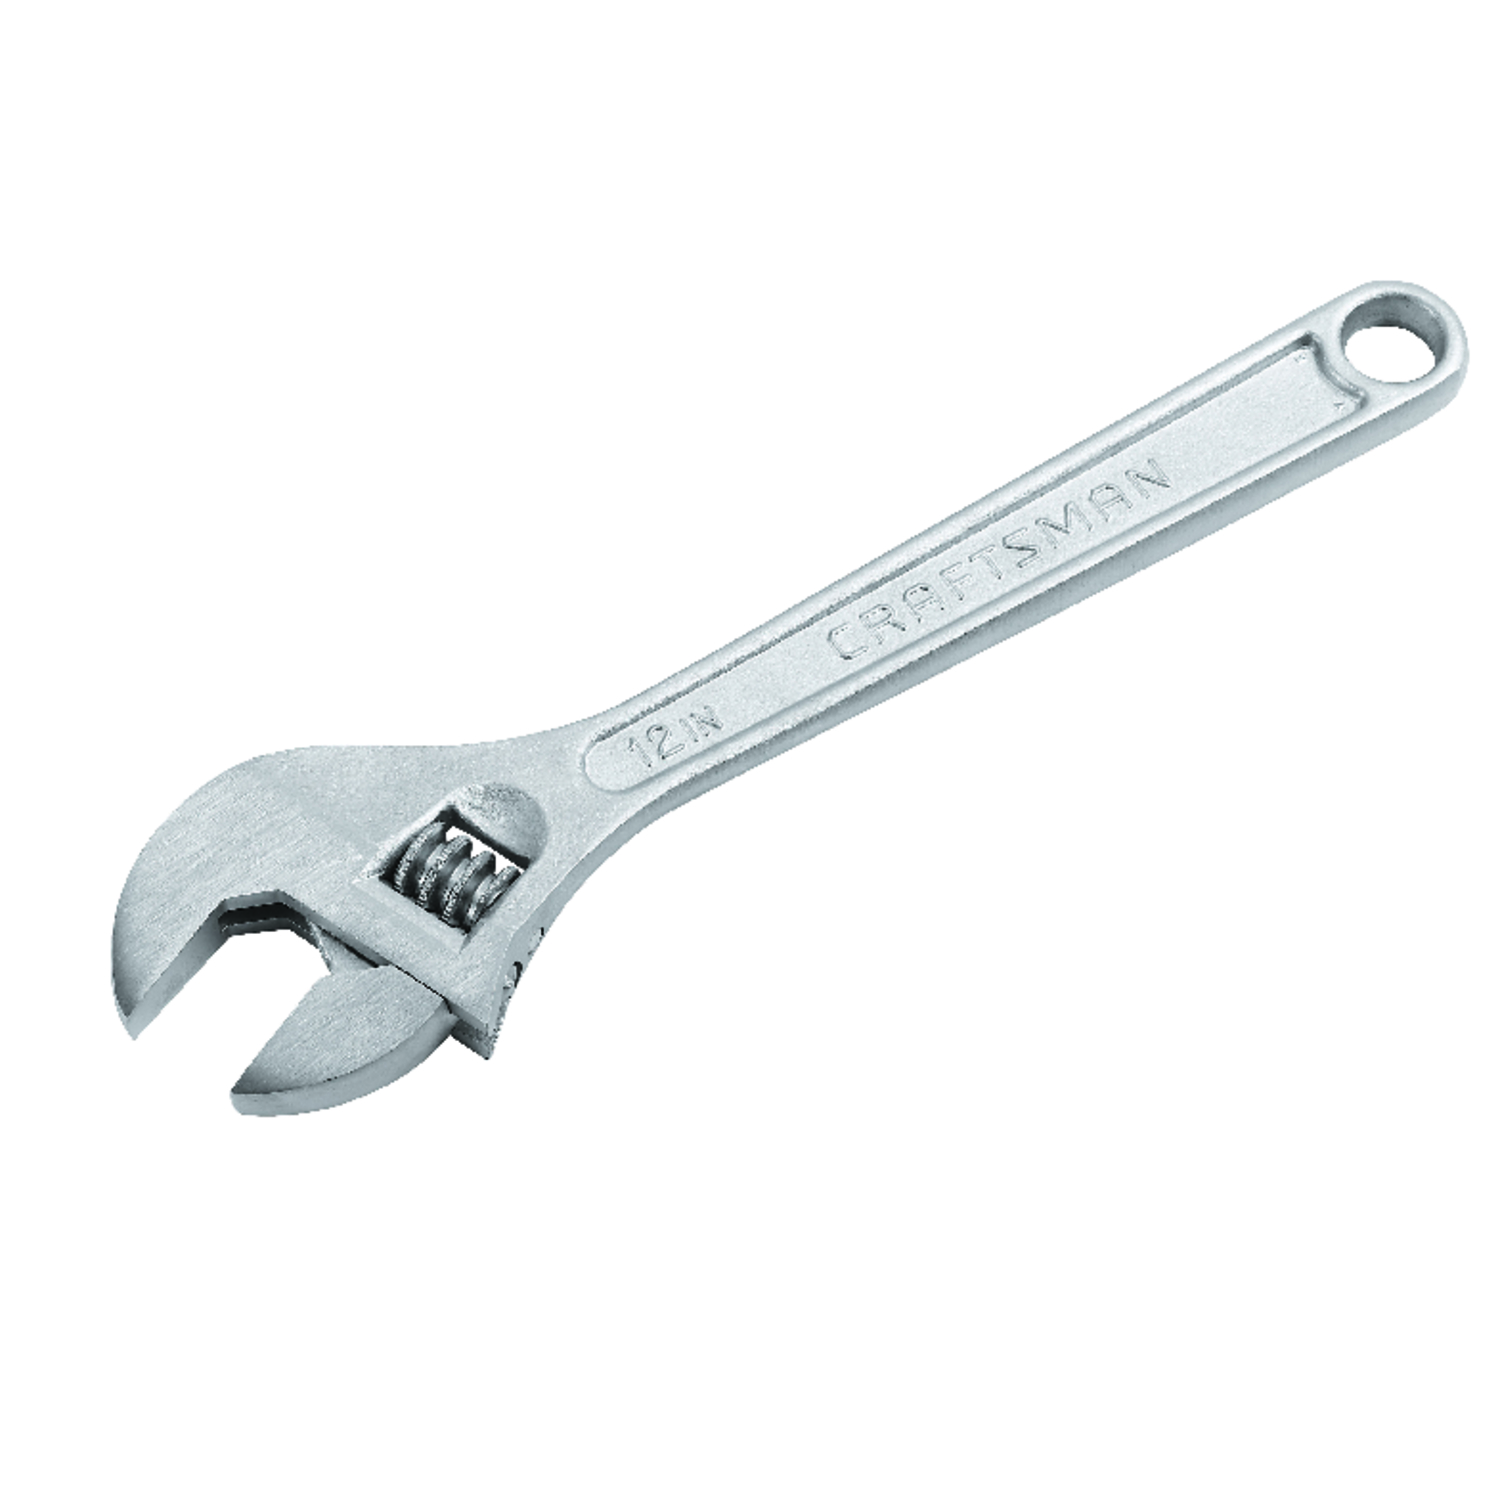 UPC 885911594172 product image for Craftsman 12 in. L Adjustable Wrench 1 pc. | upcitemdb.com